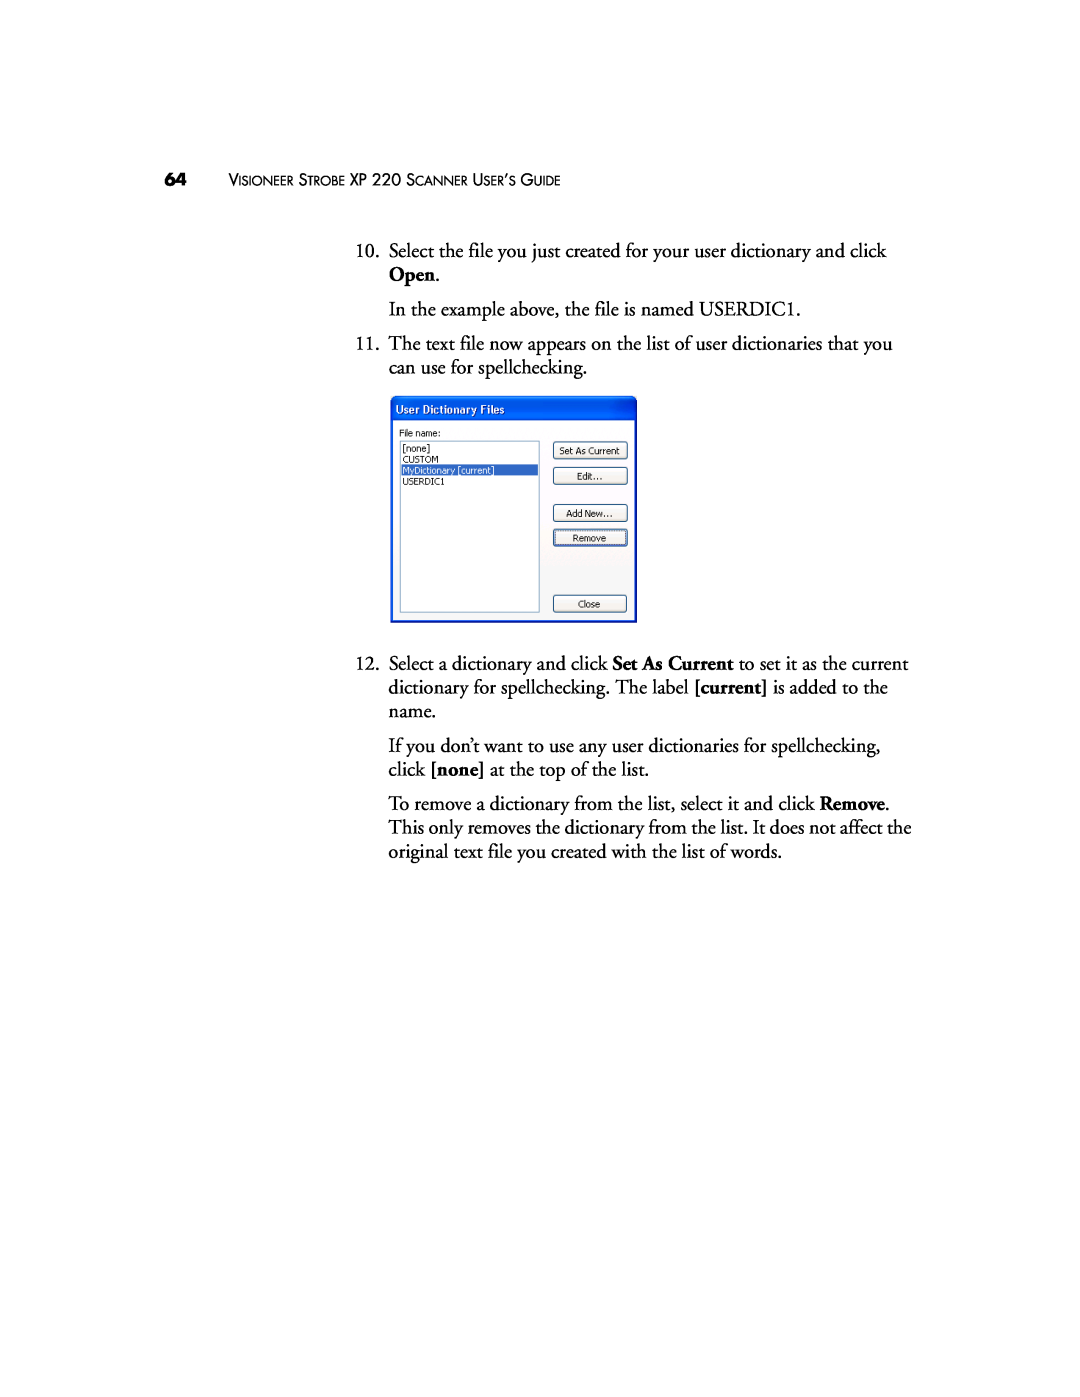 Visioneer XP220 manual In the example above, the file is named USERDIC1 